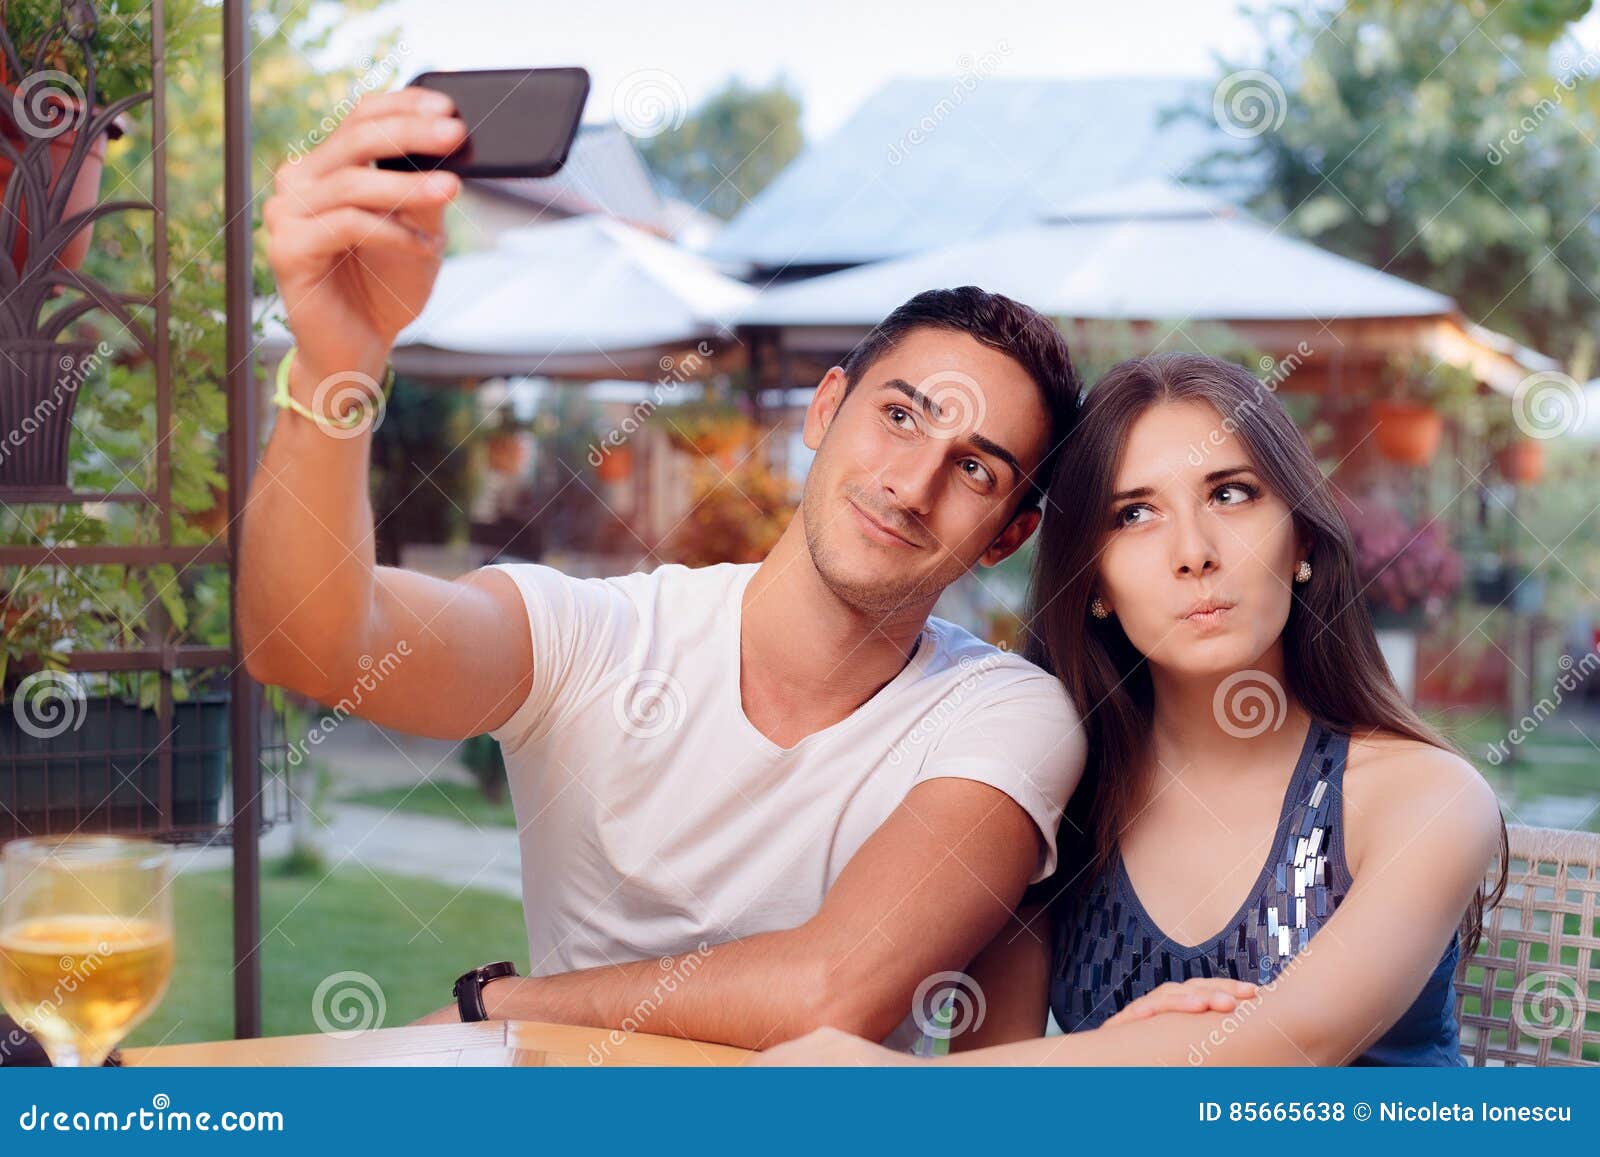 Romantic Couple On A Date At The Restaurant Taking A Selfie Stock Photo